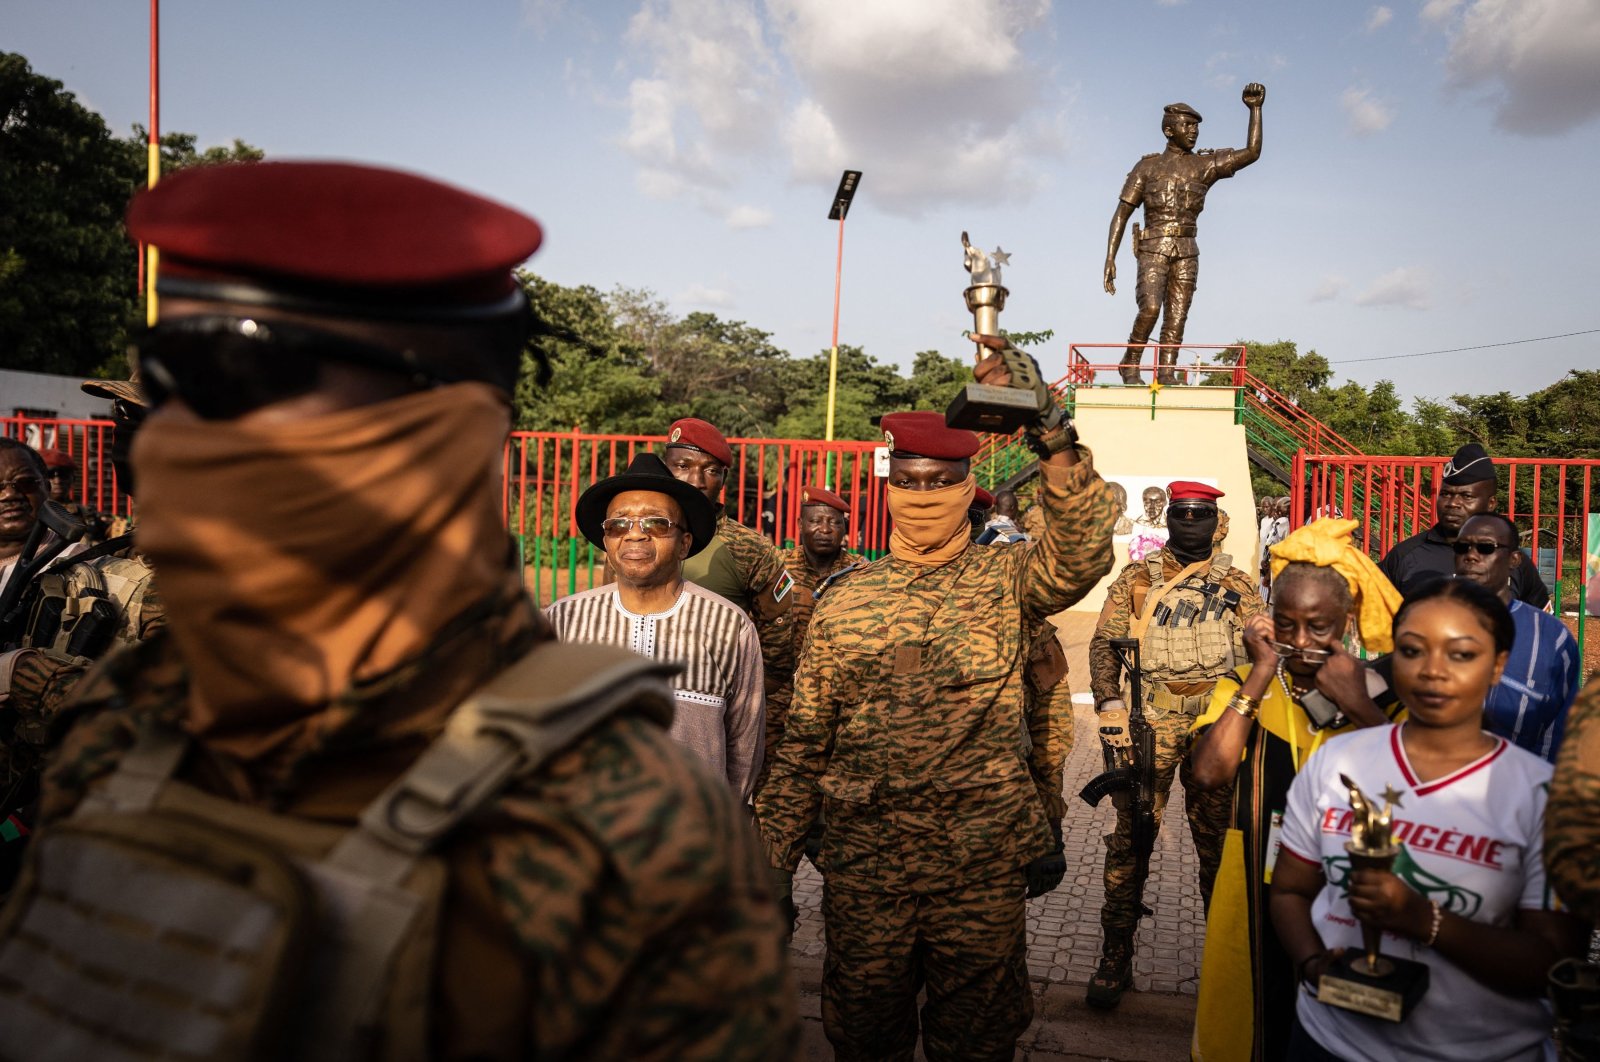 Burkina Faso&#039;s President Captain Ibrahim Traore poses with the torch given by revolutionary elders during the ceremony for the 35th anniversary of the Thomas Sankara assassination, in Ouagadougou, Burkina Faso, Oct. 15, 2022. (AFP Photo)